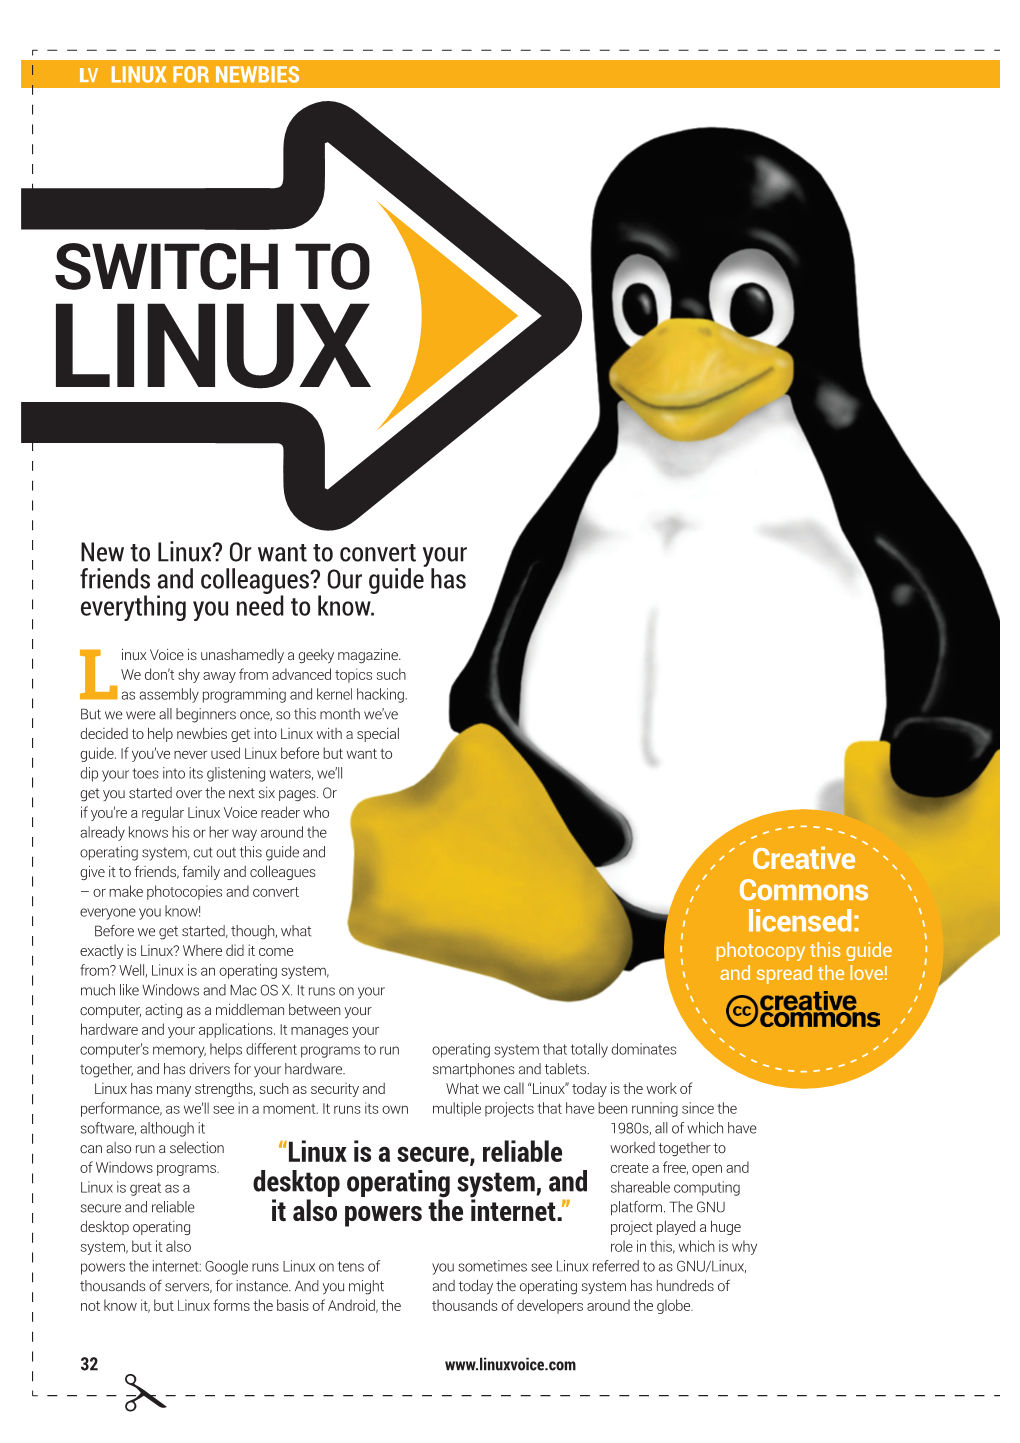 Creative Commons Licensed: Linux